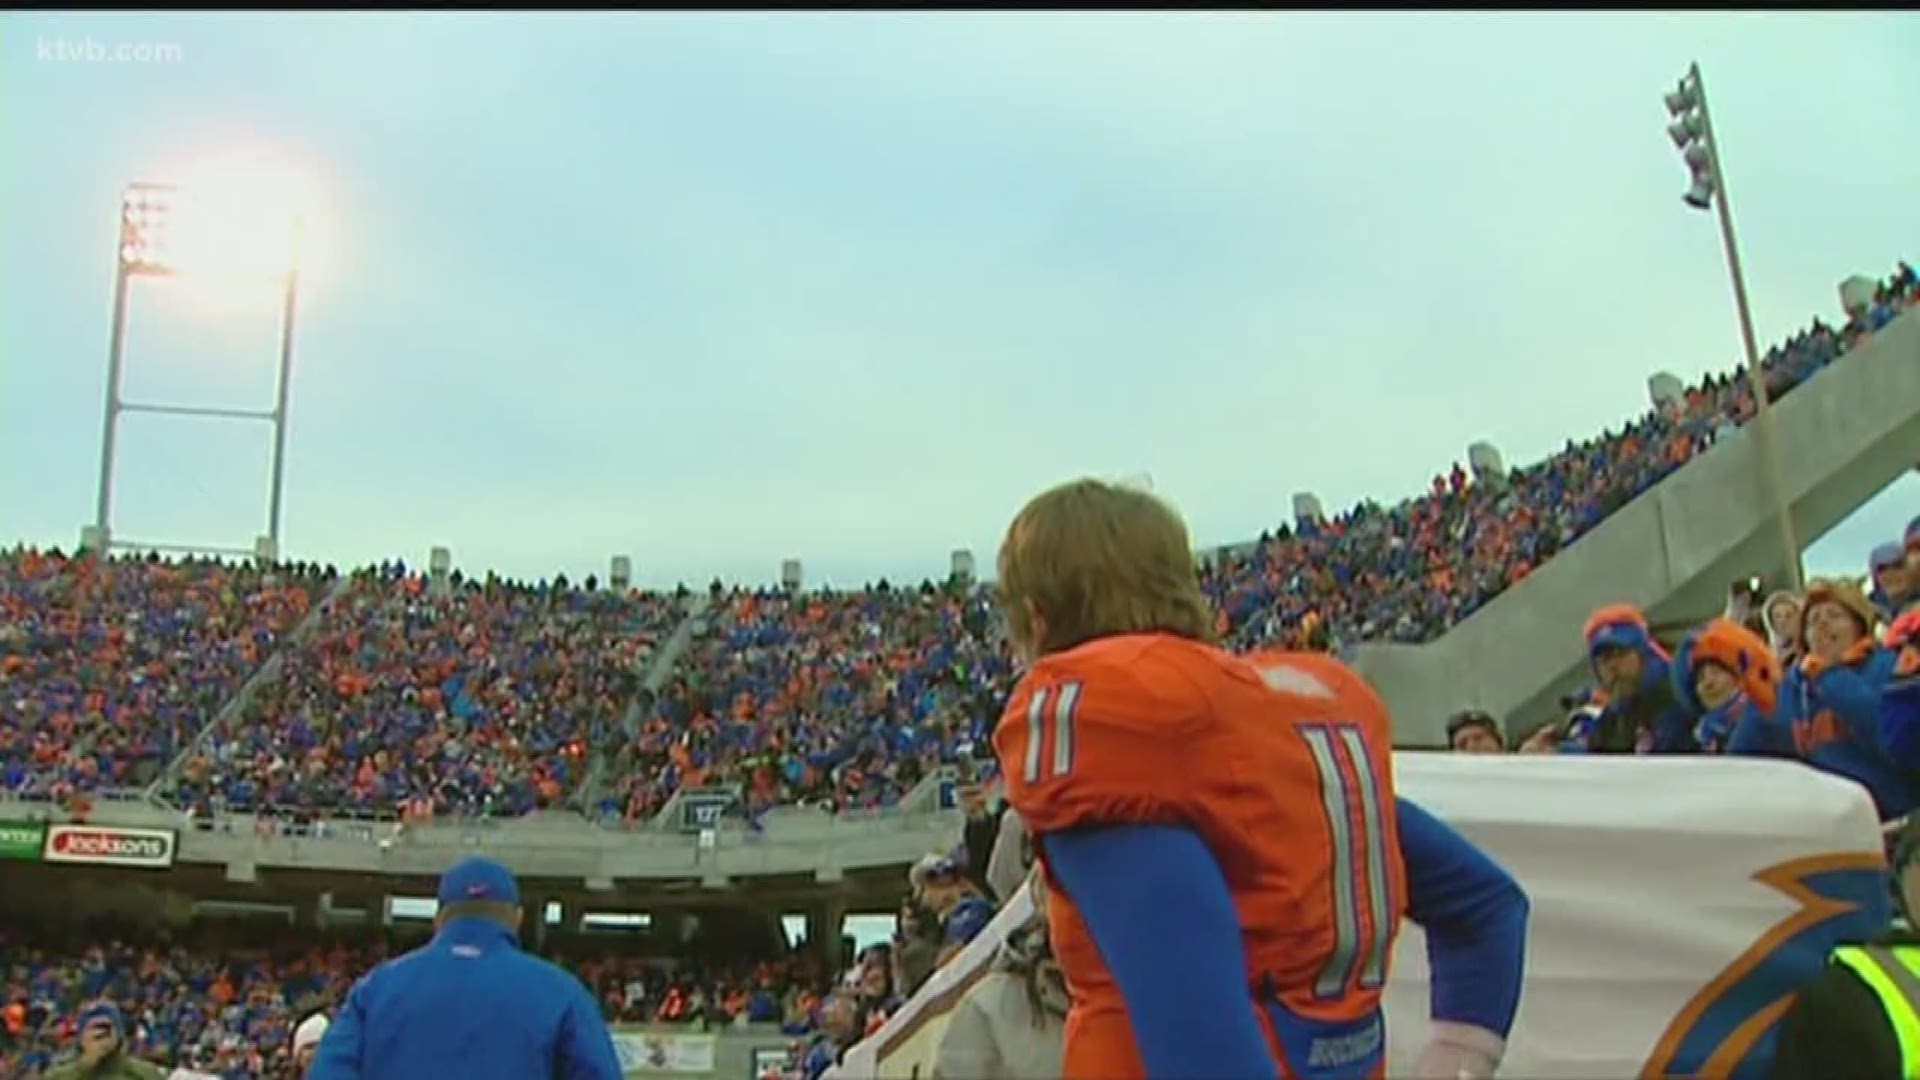 News about Kellen Moore always travels fast around Boise and always bringing in huge audiences and fans on the top of the charts.